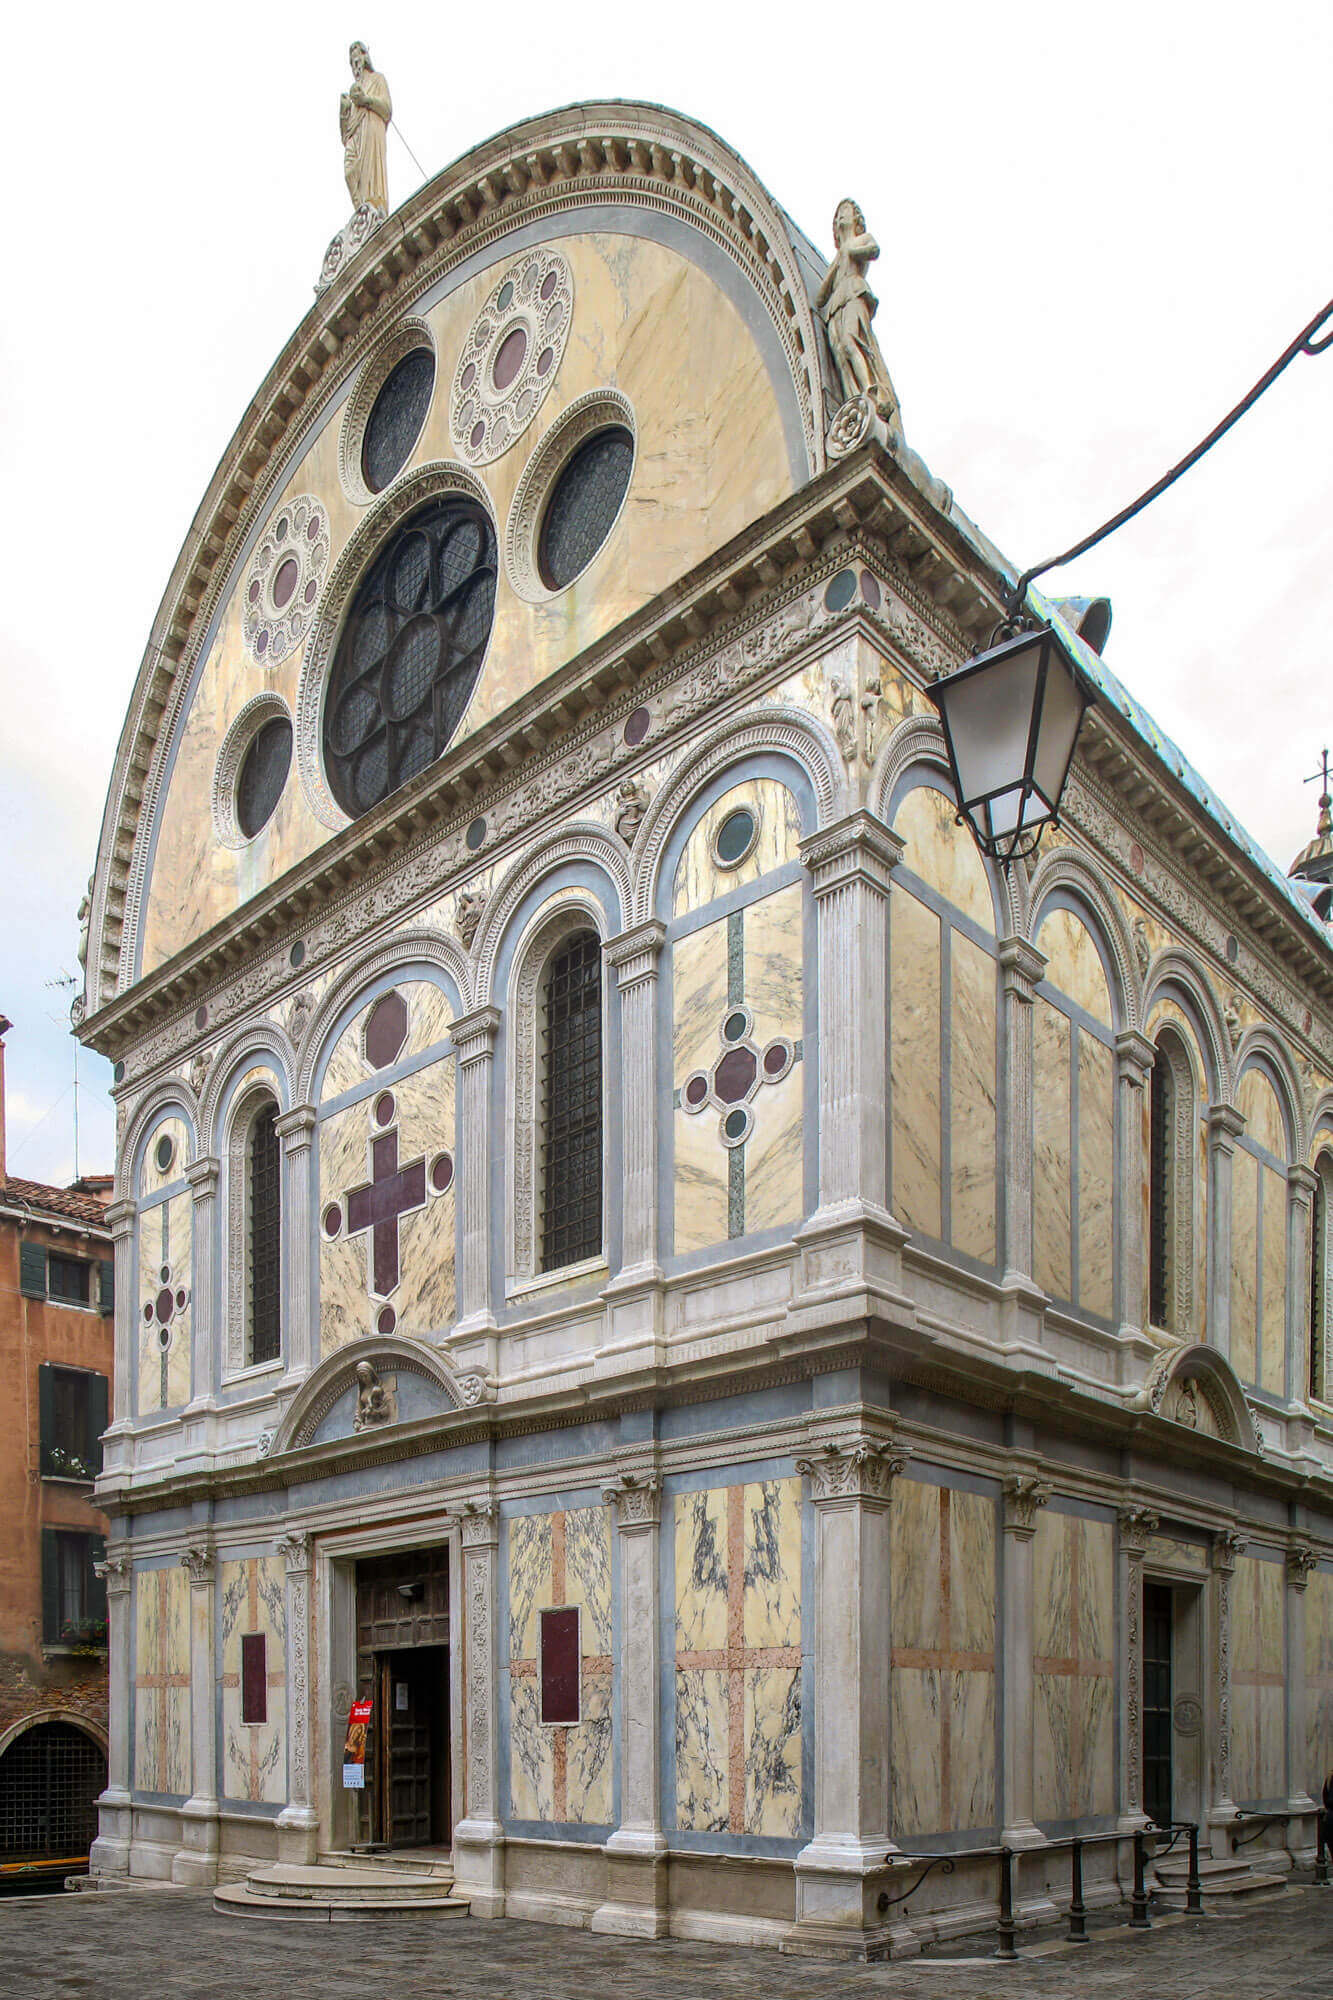 Santa Maria dei Miracoli church in Venice is clad inside and out in colourful marble